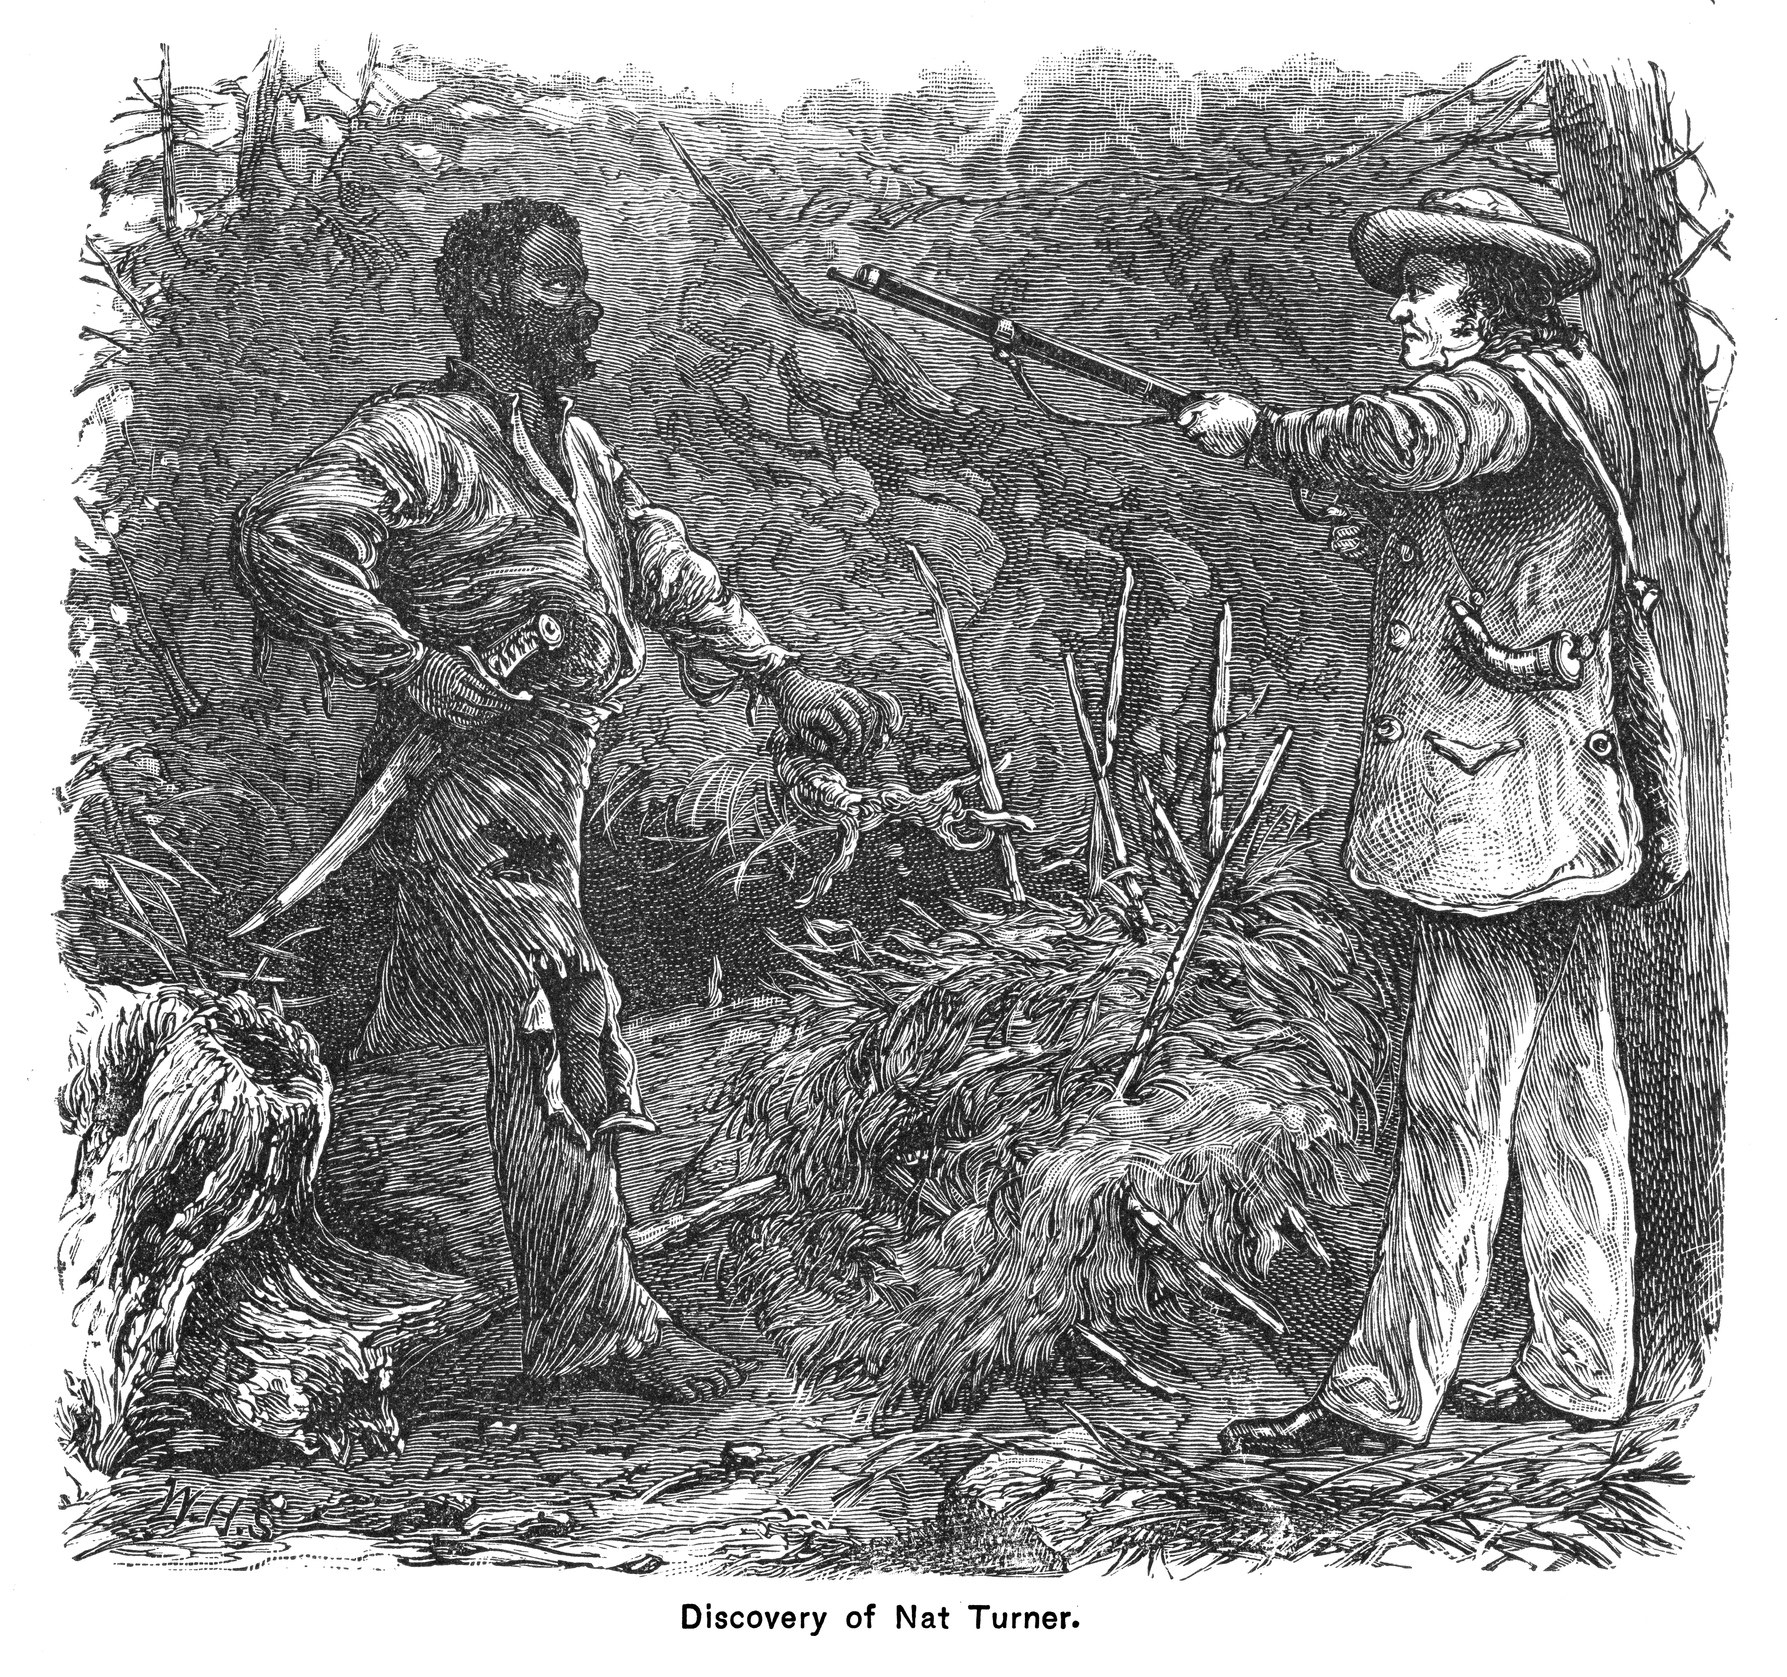 drawing of an enslaved person and a person pointing a gun at them